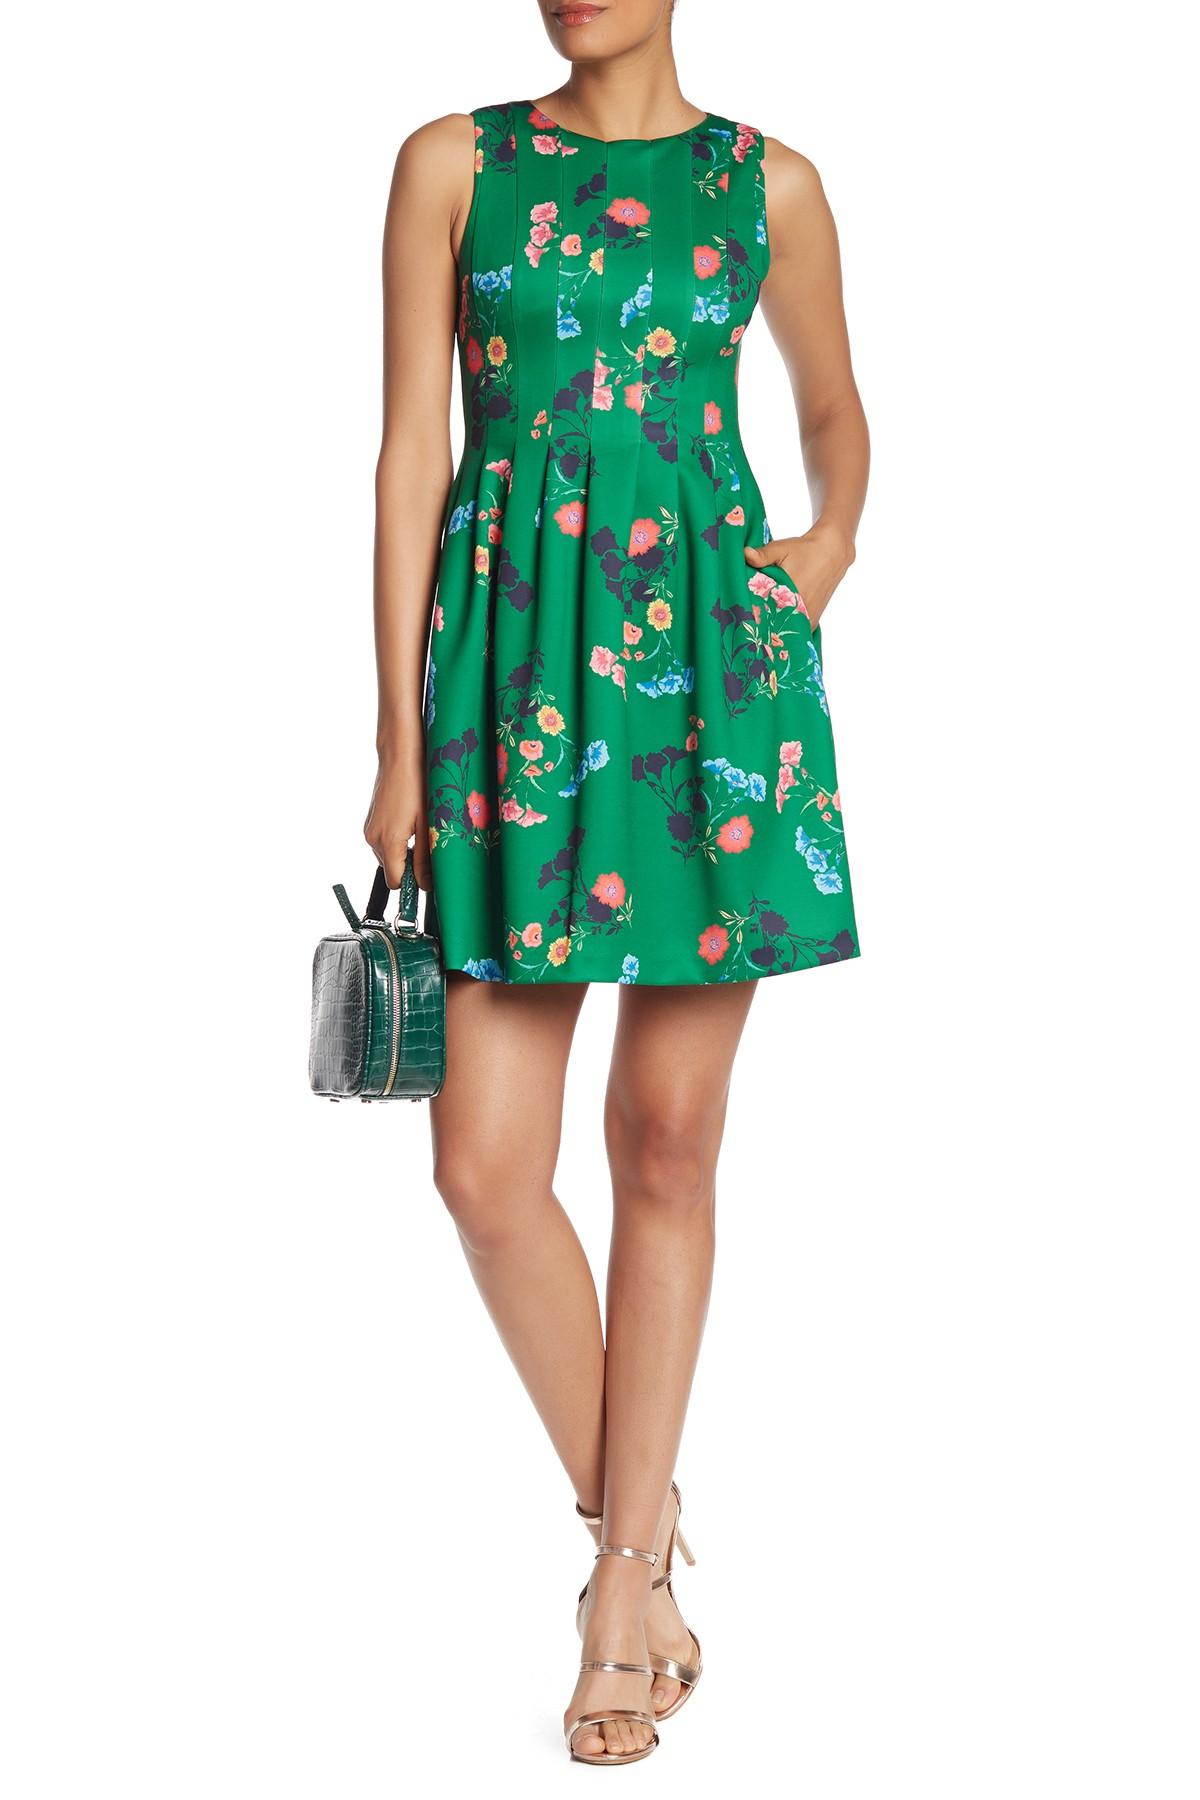 Vince Camuto Floral Fit And Flare Scuba Dress In Green Lyst 